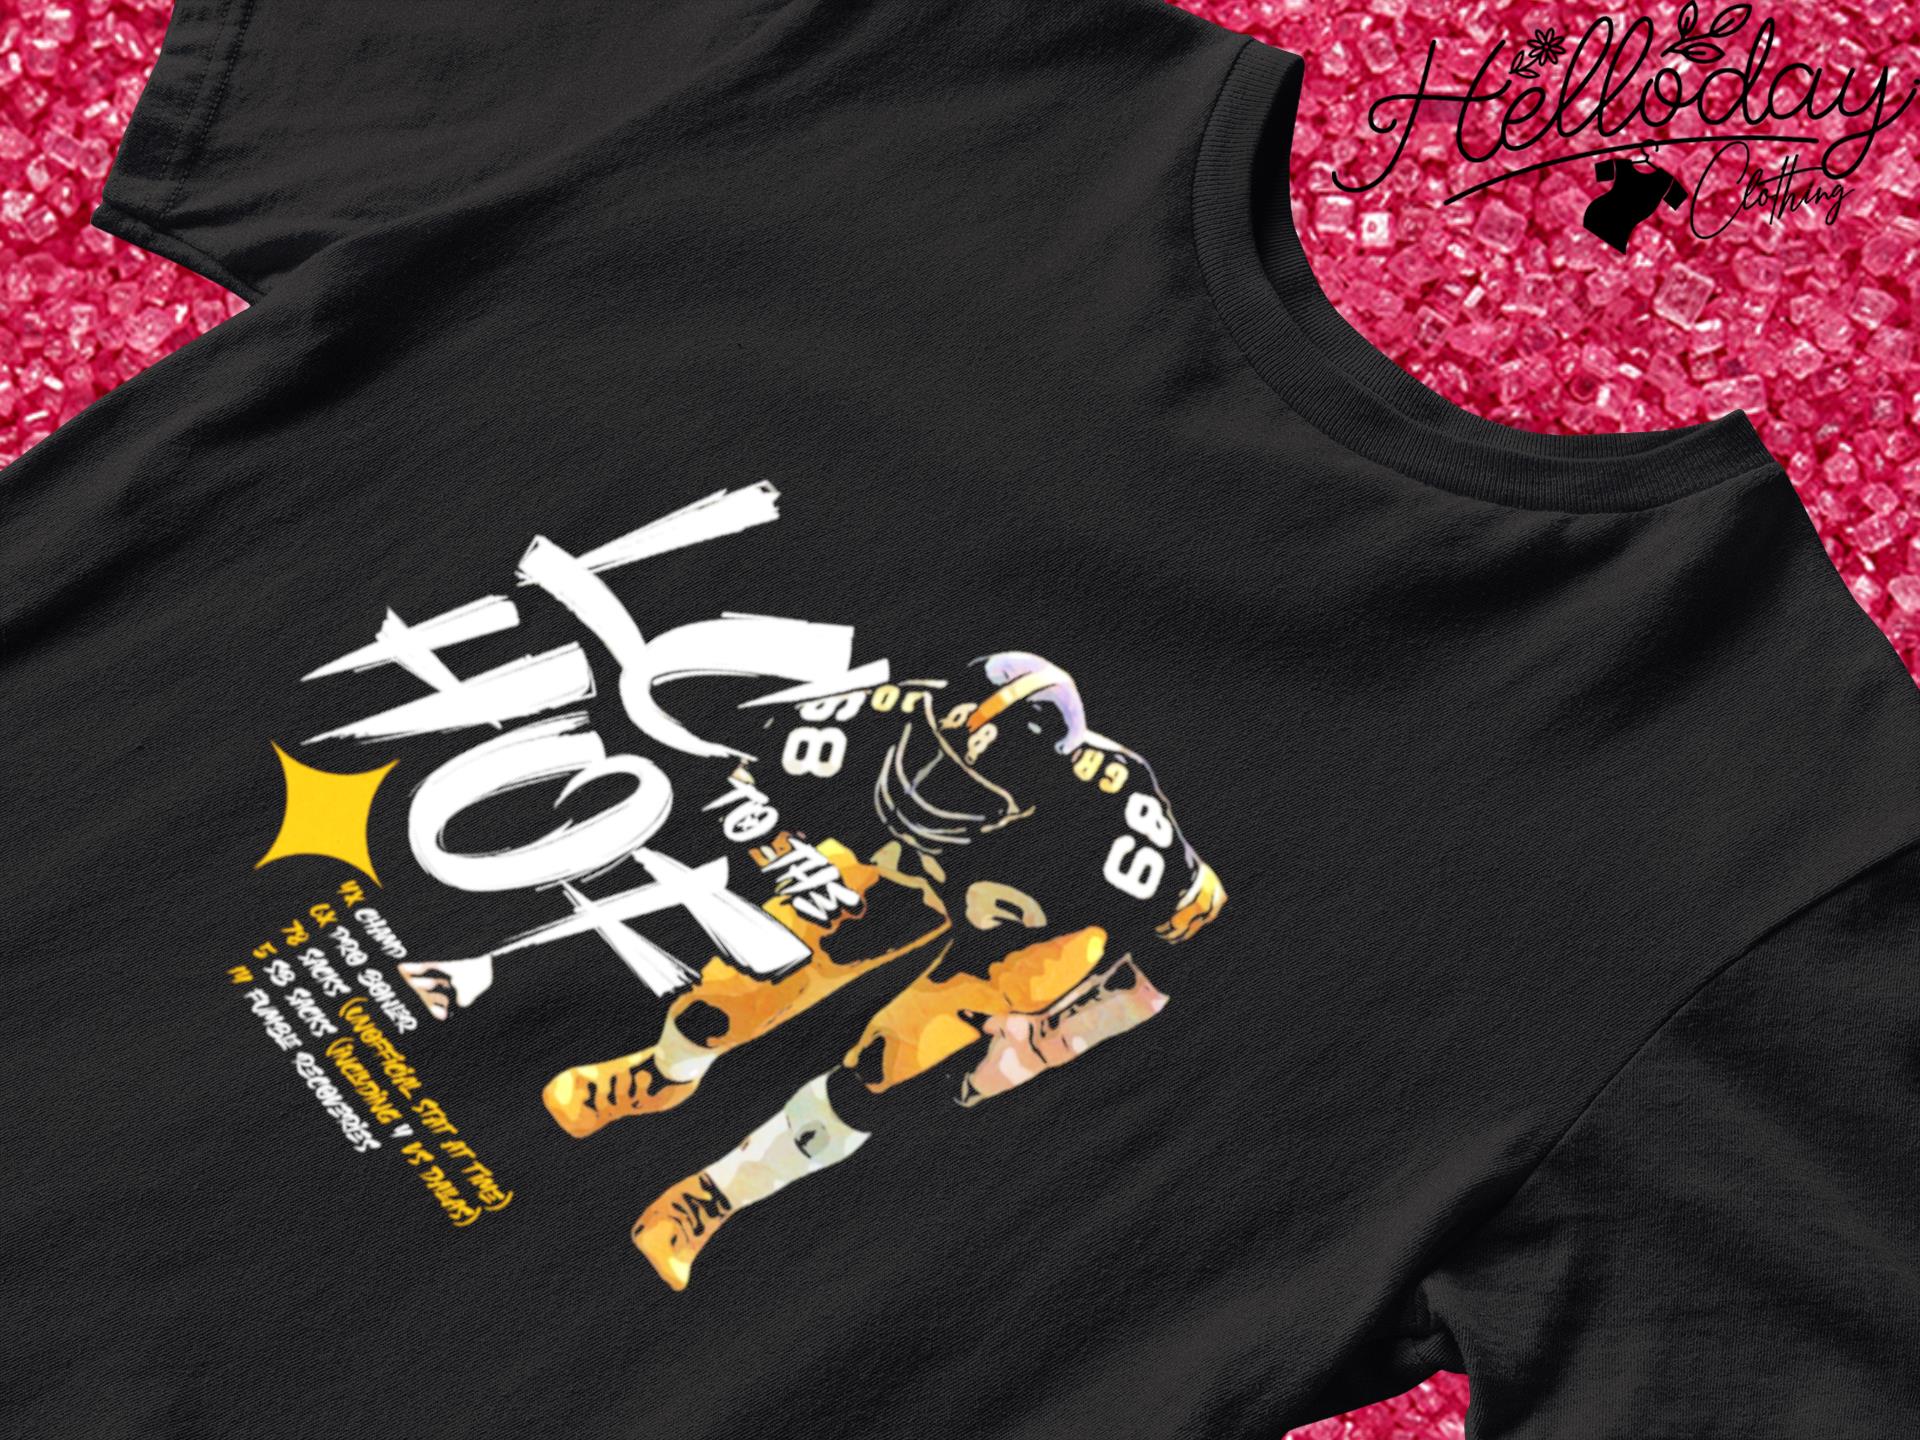 LC to the HOF 4X Champ Pittsburgh Steelers shirt